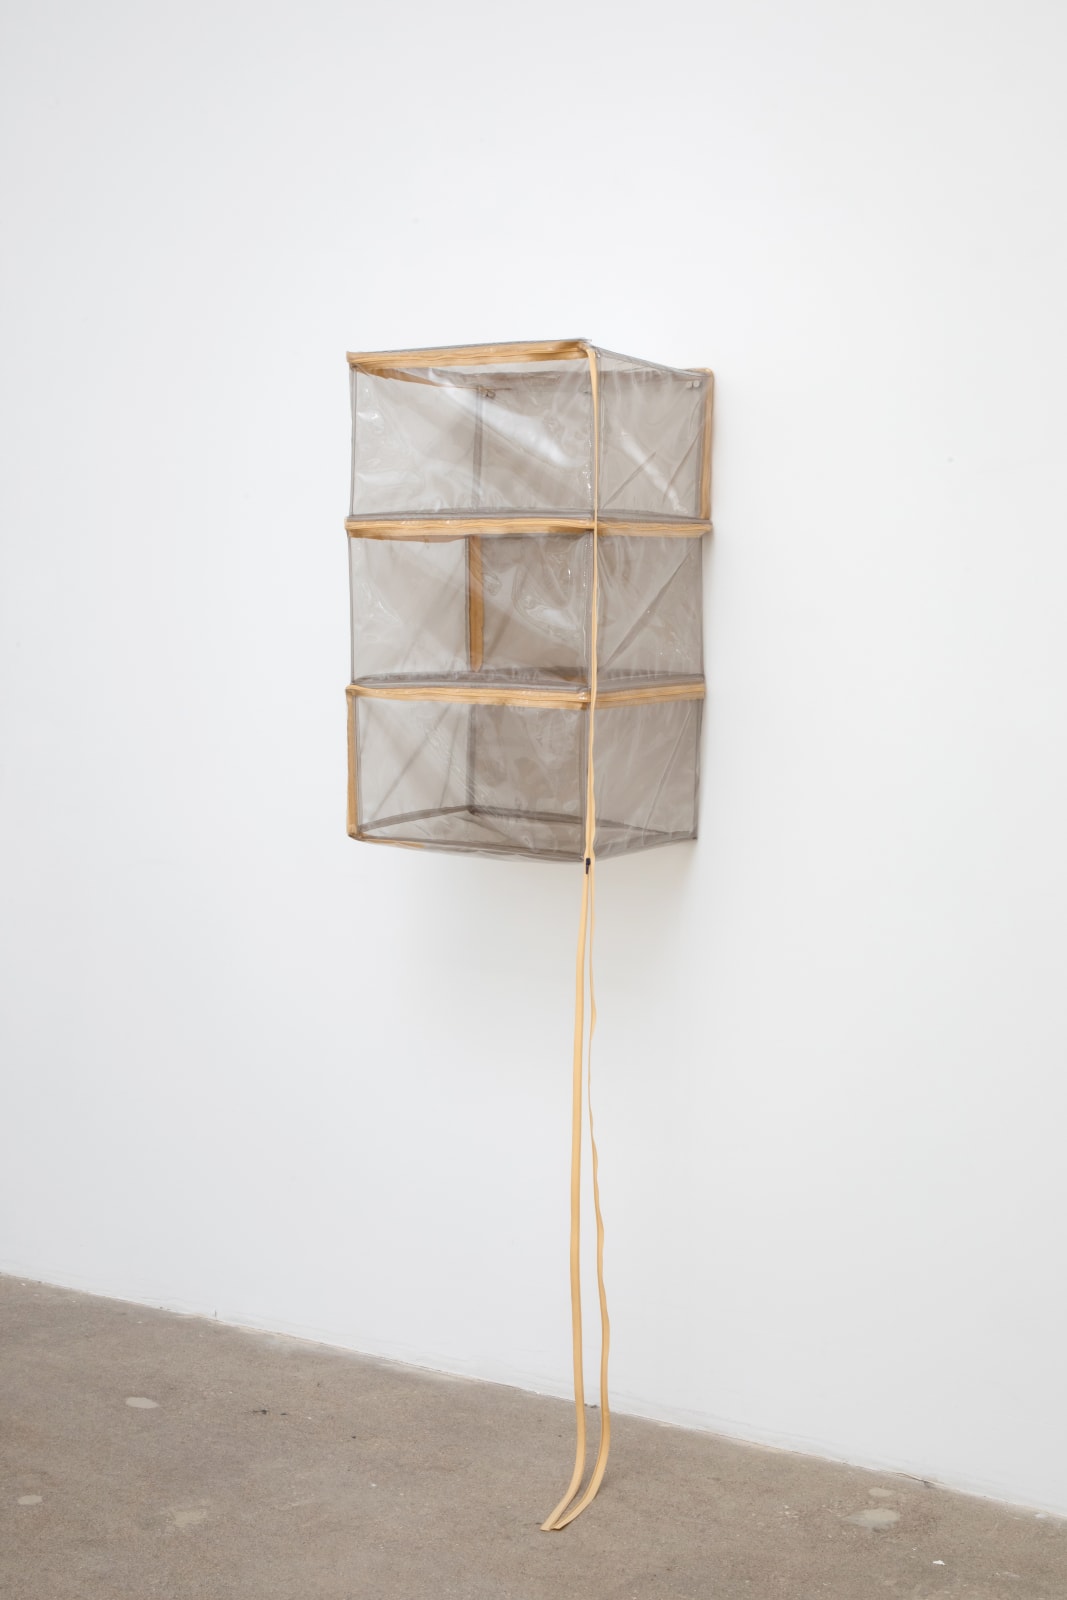 Alina Tenser, Container for Utterance, vacant, tinted blond, 2022